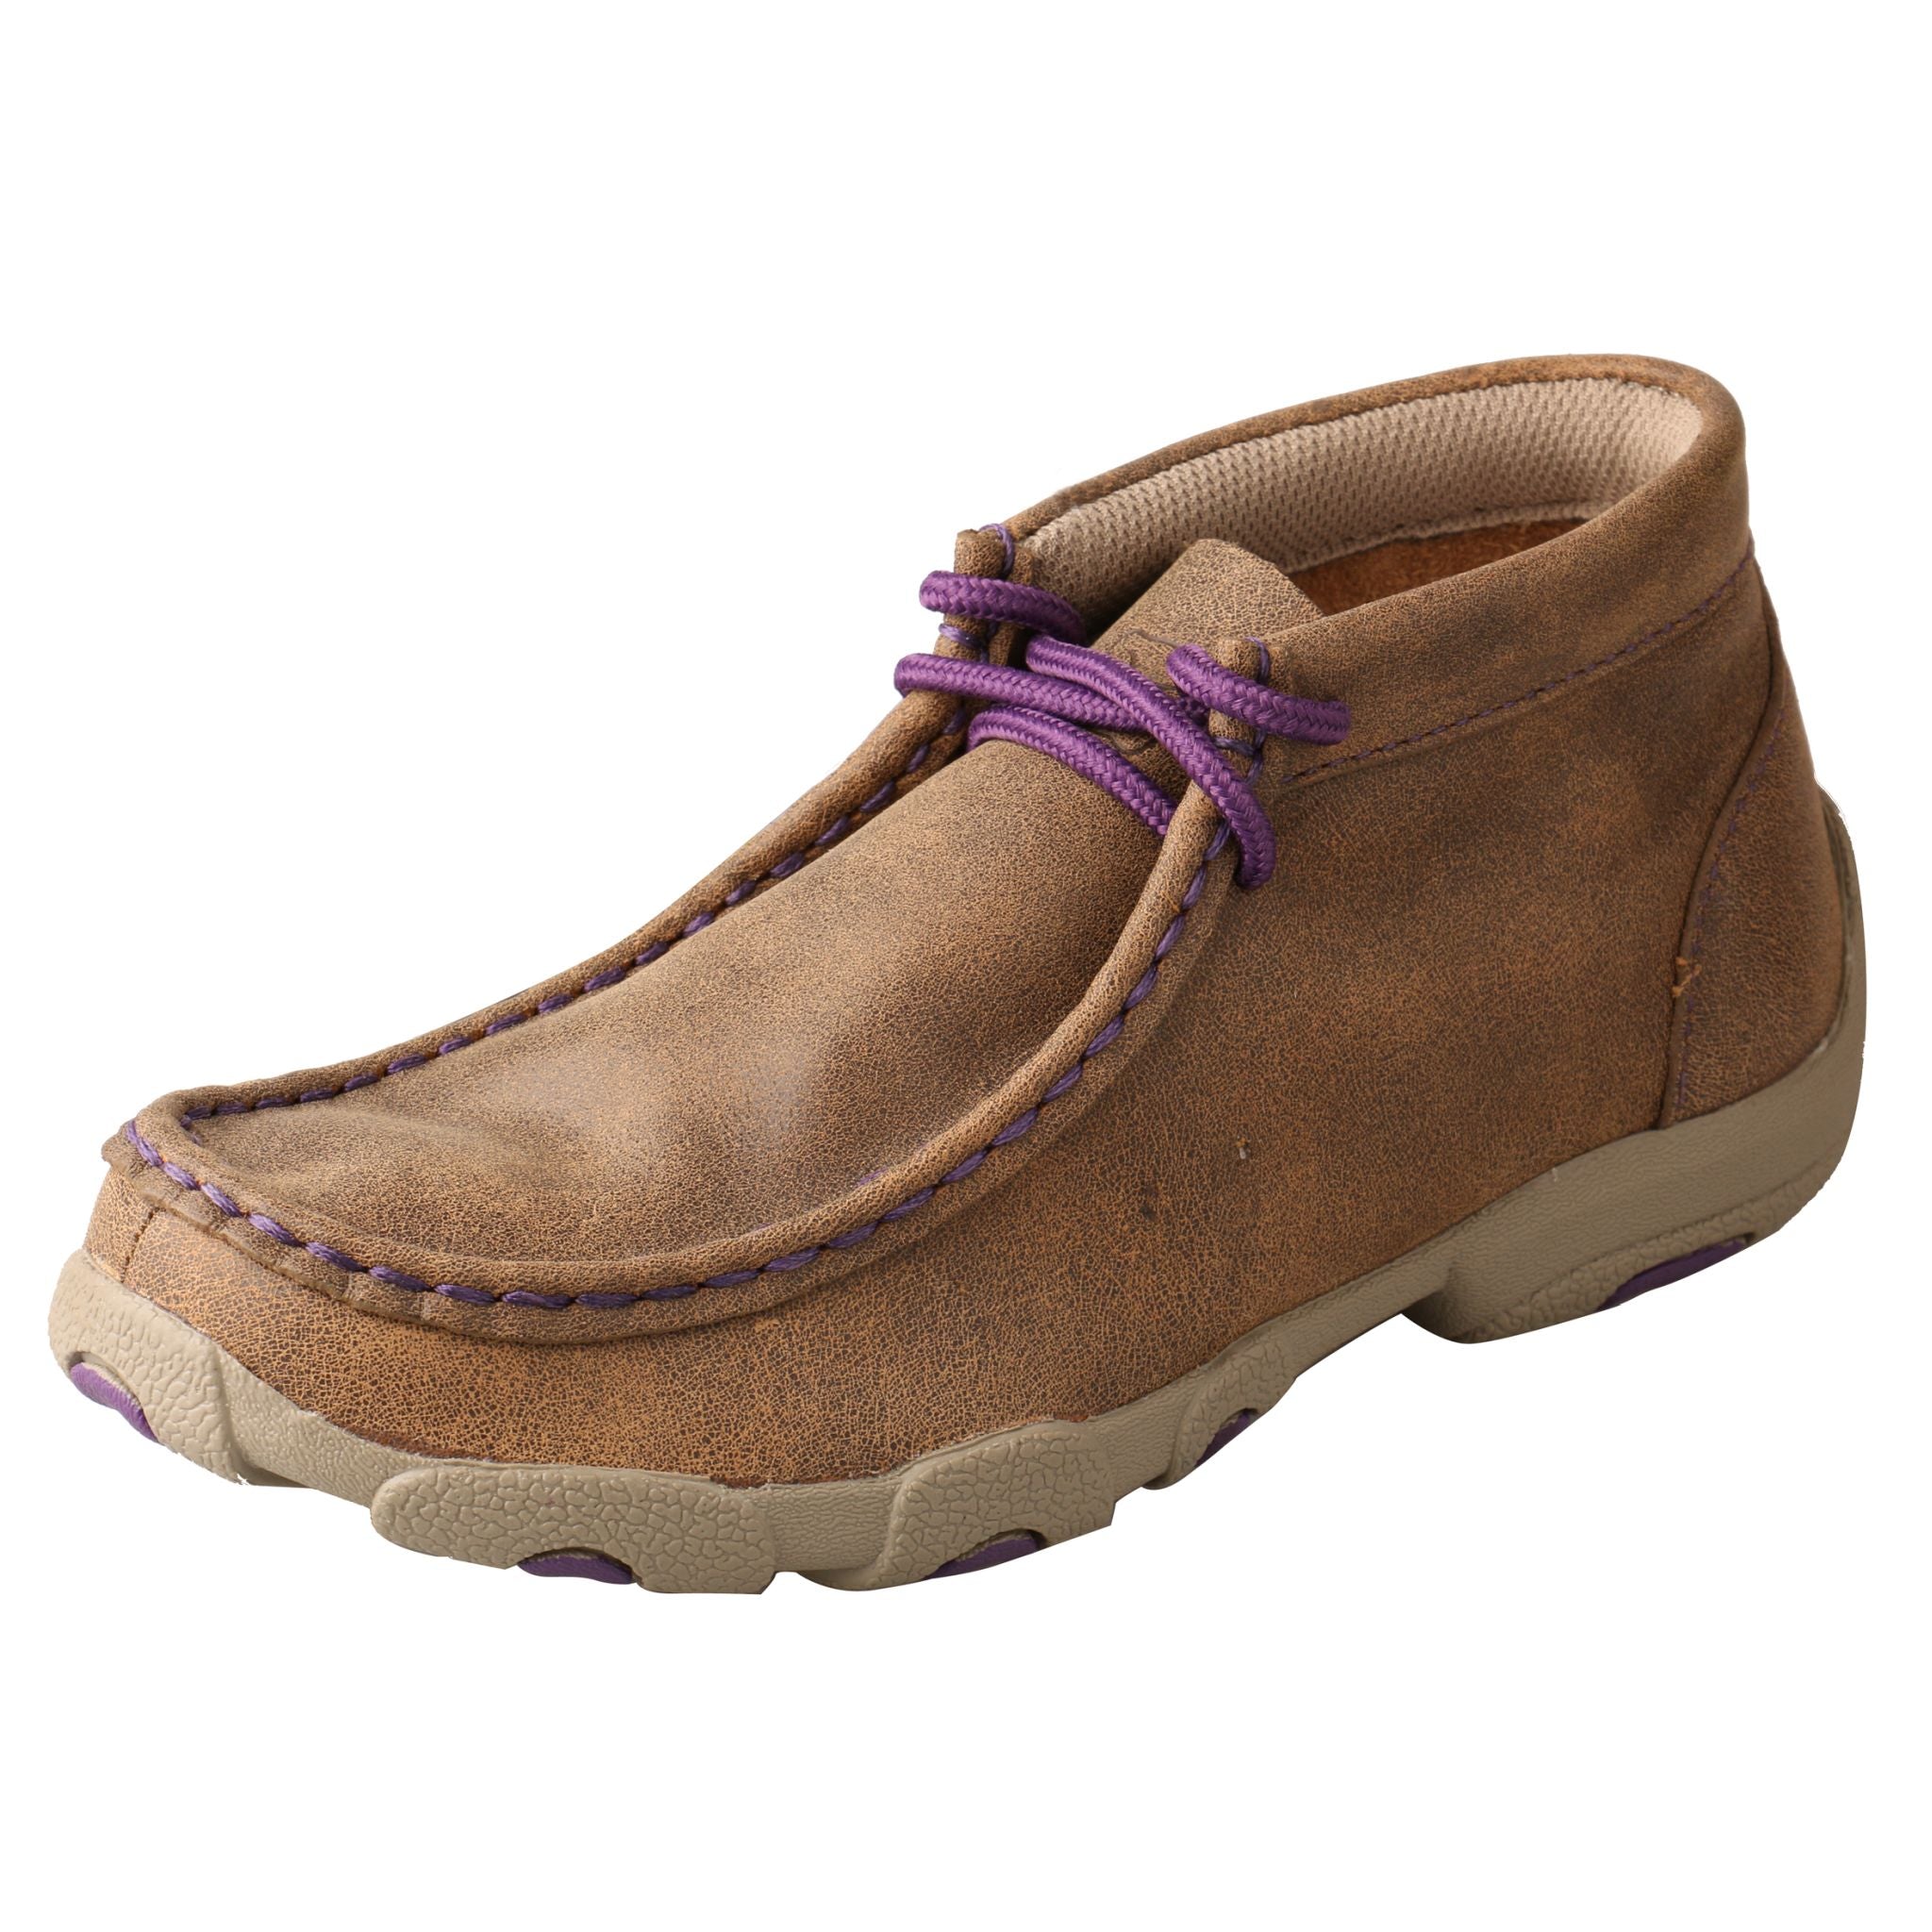 'Twisted X' Kids' Driving Moccasin - Bomber / Purple